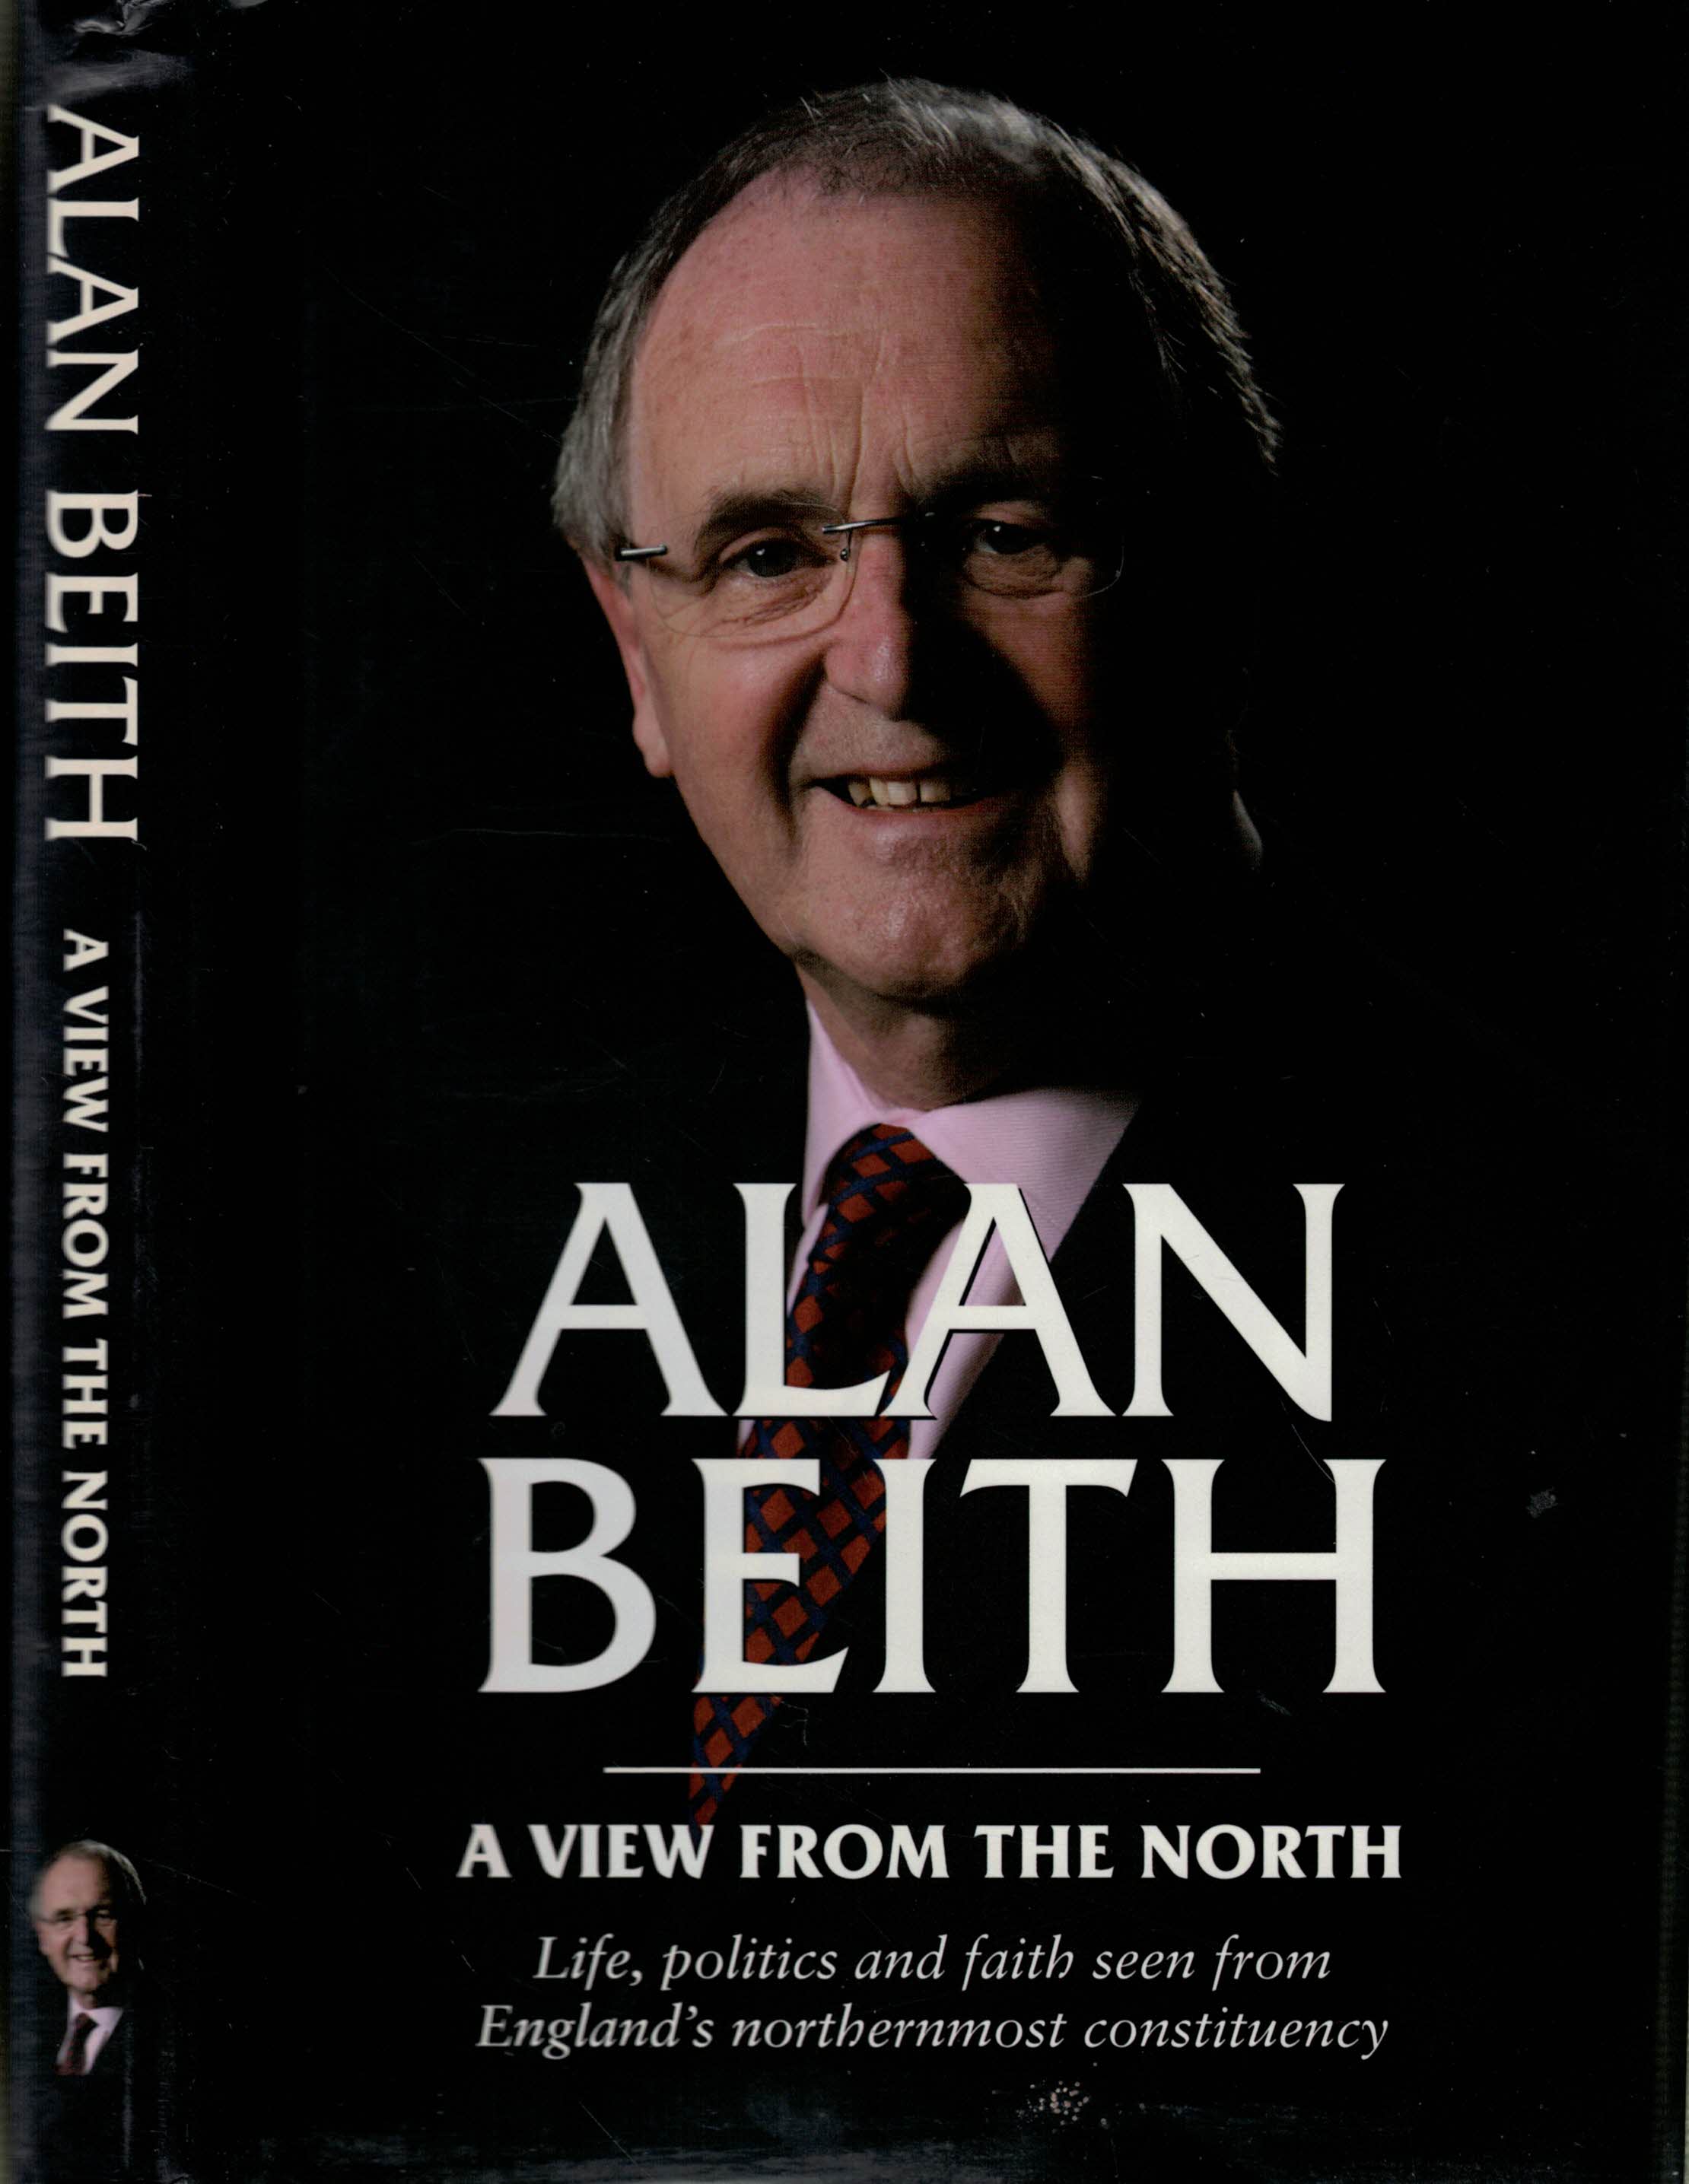 Alan Beith: A View from the North. Signed copy.